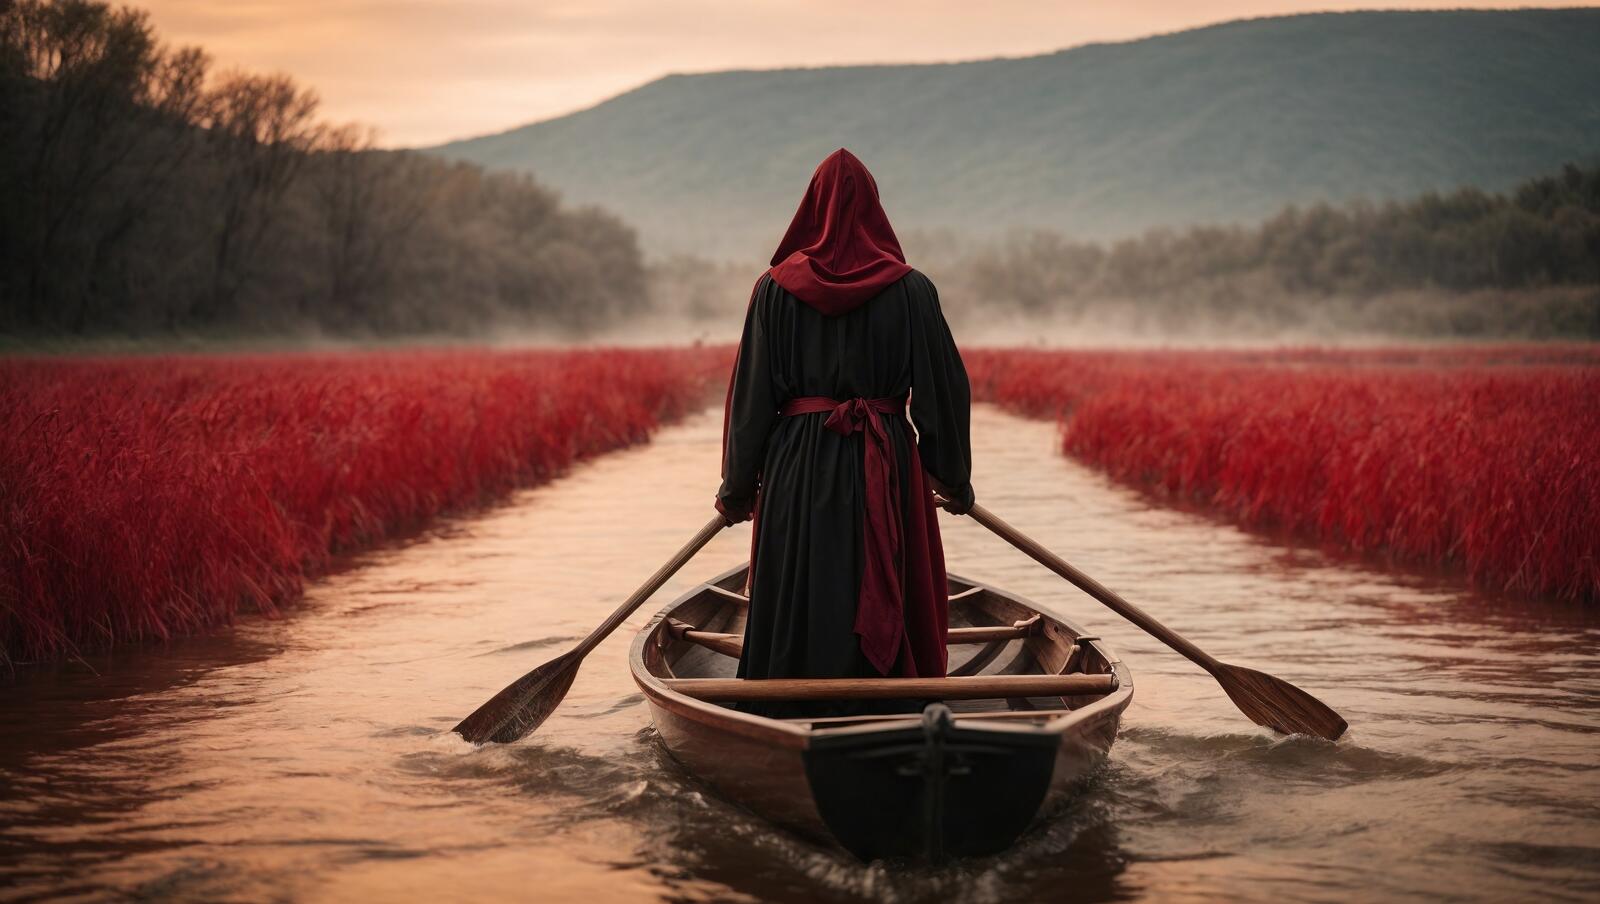 Free photo A man rowing a boat on the lake, wearing a red hoodie